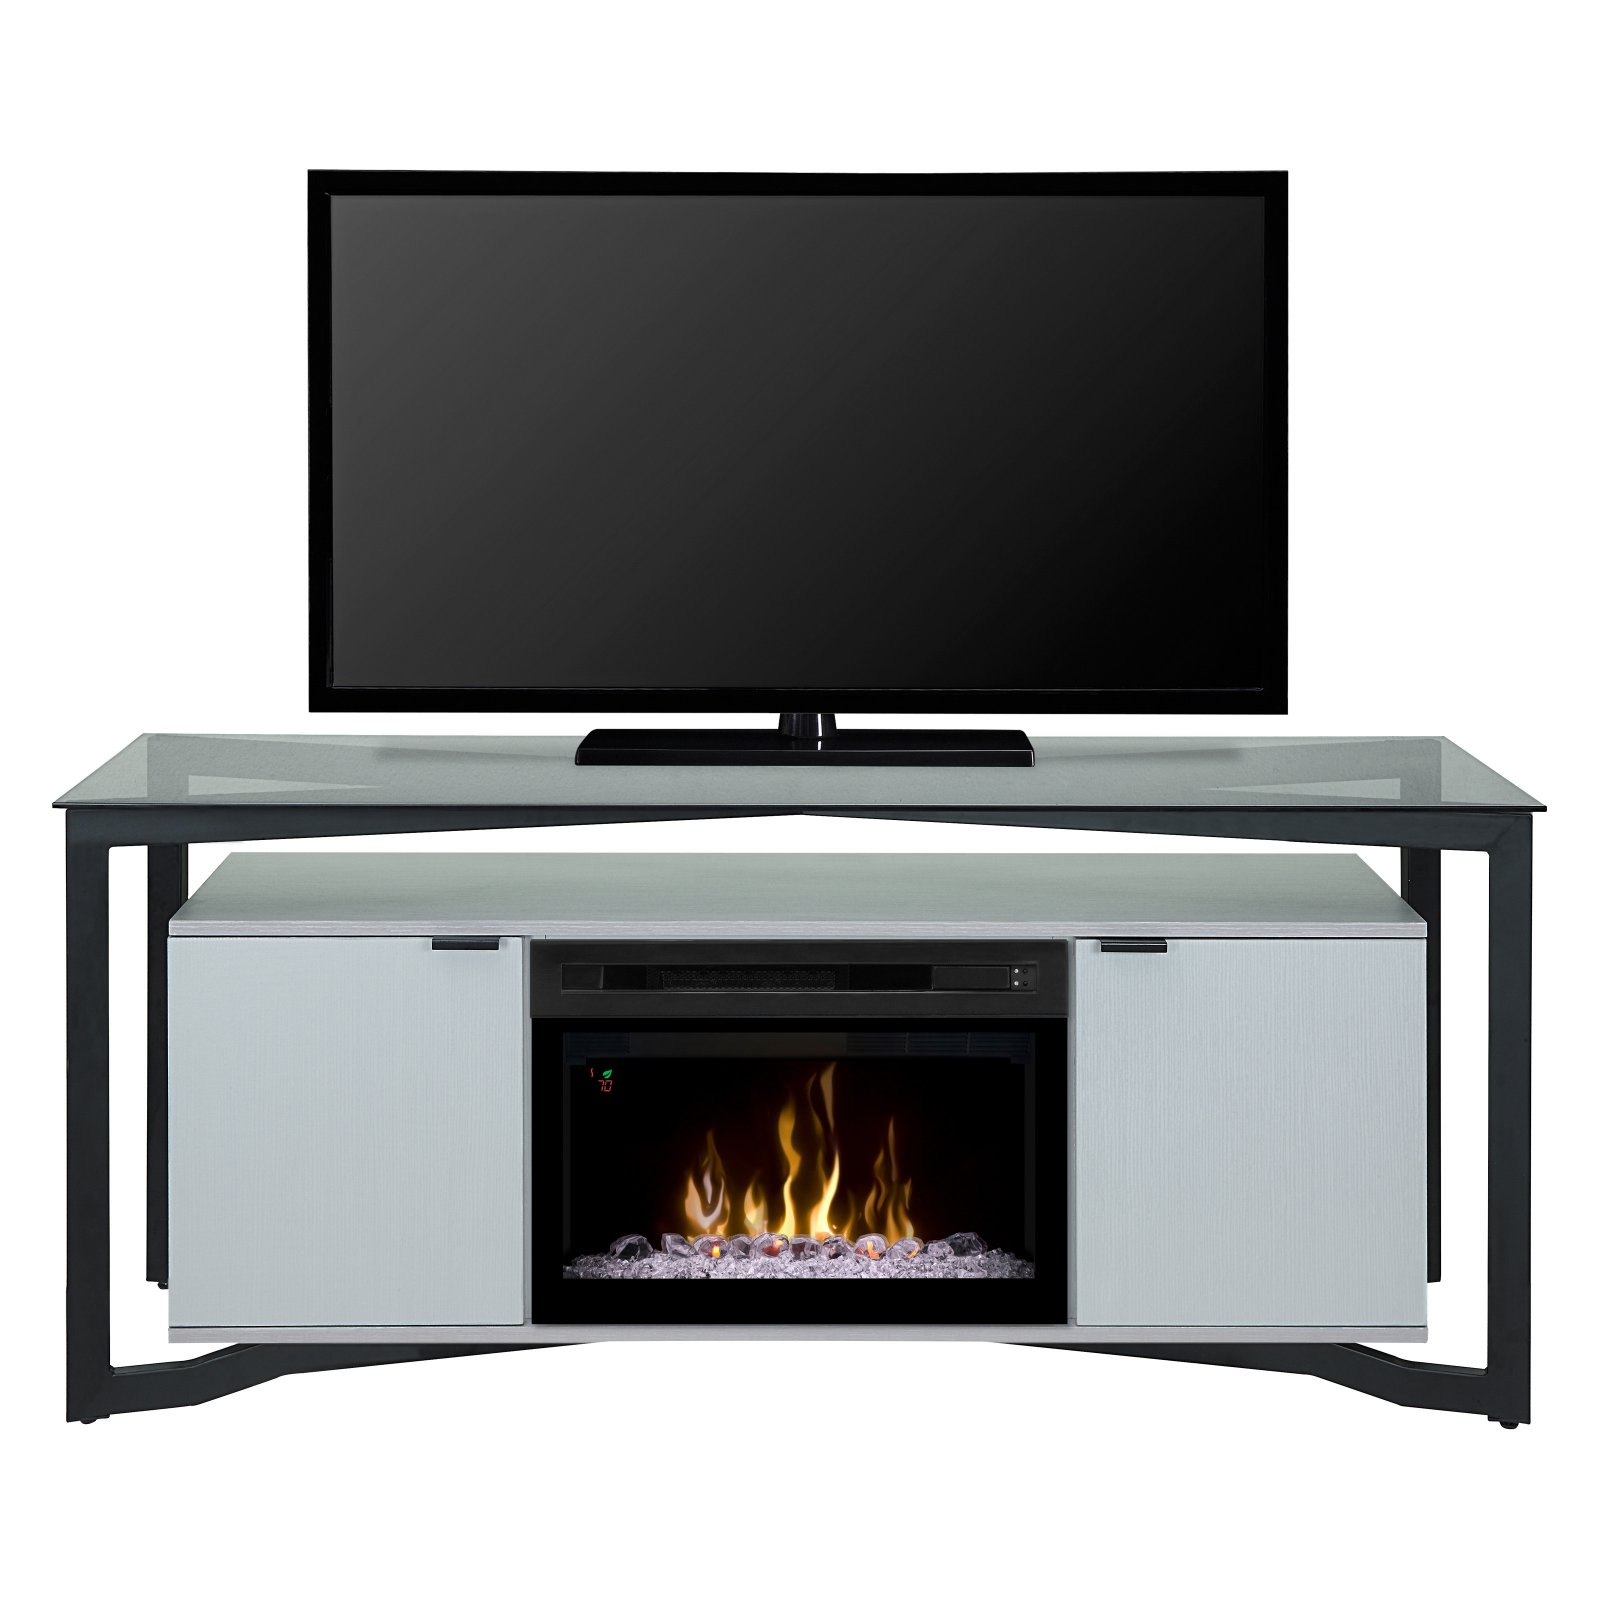 Fireplace Tv Stand Near Me New Dimplex Christian Electric Fireplace Tv Stand In 2019